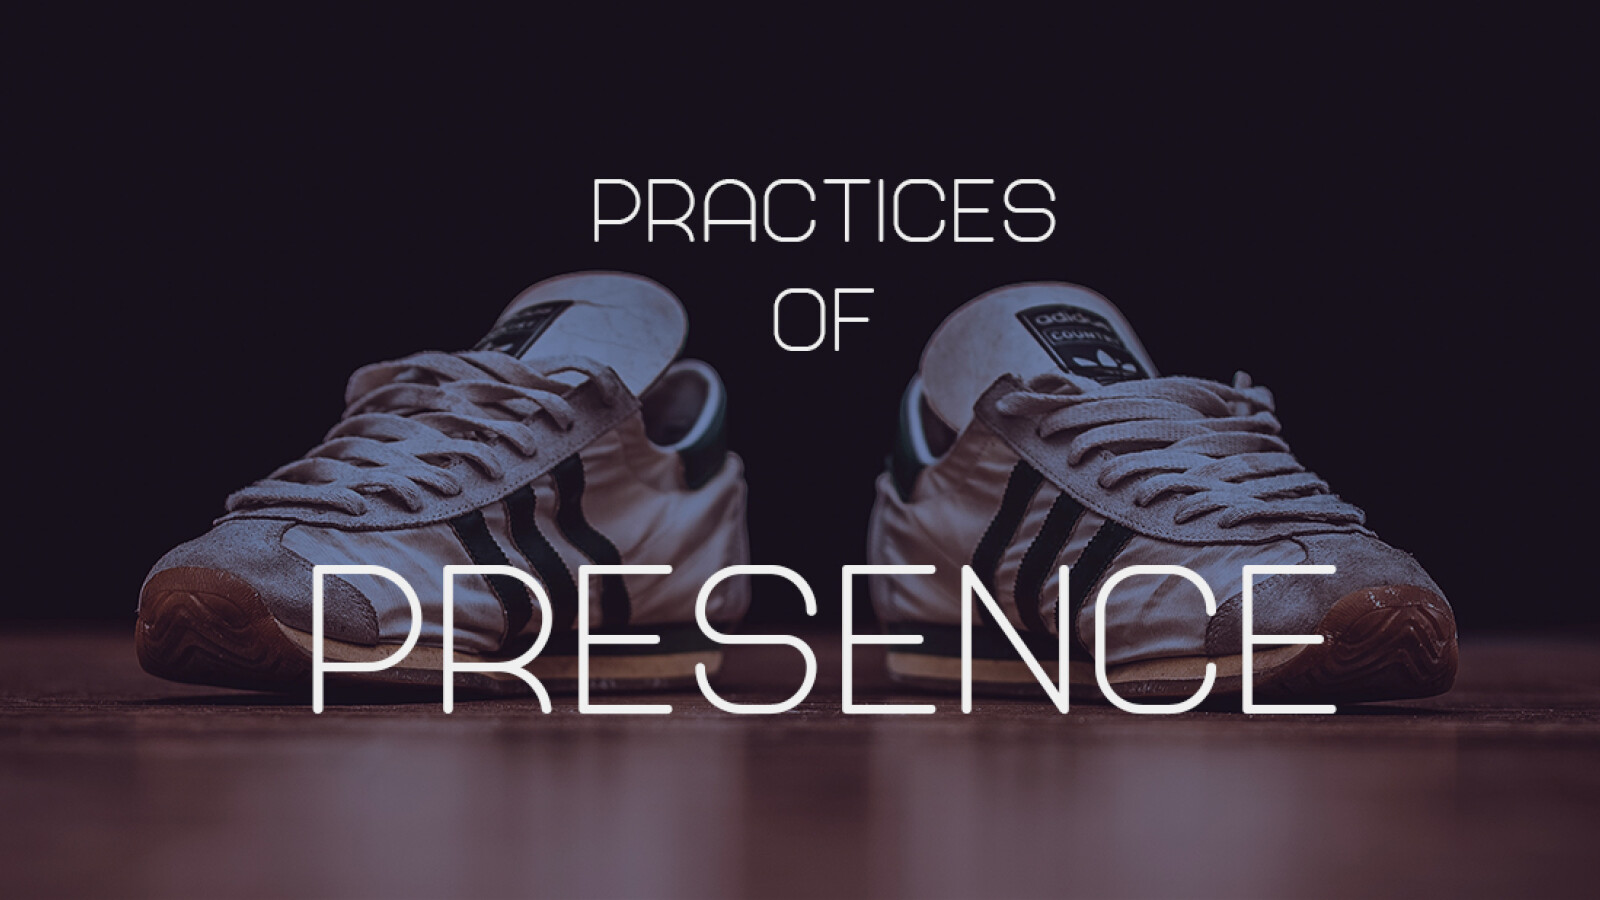 Practices of Presence